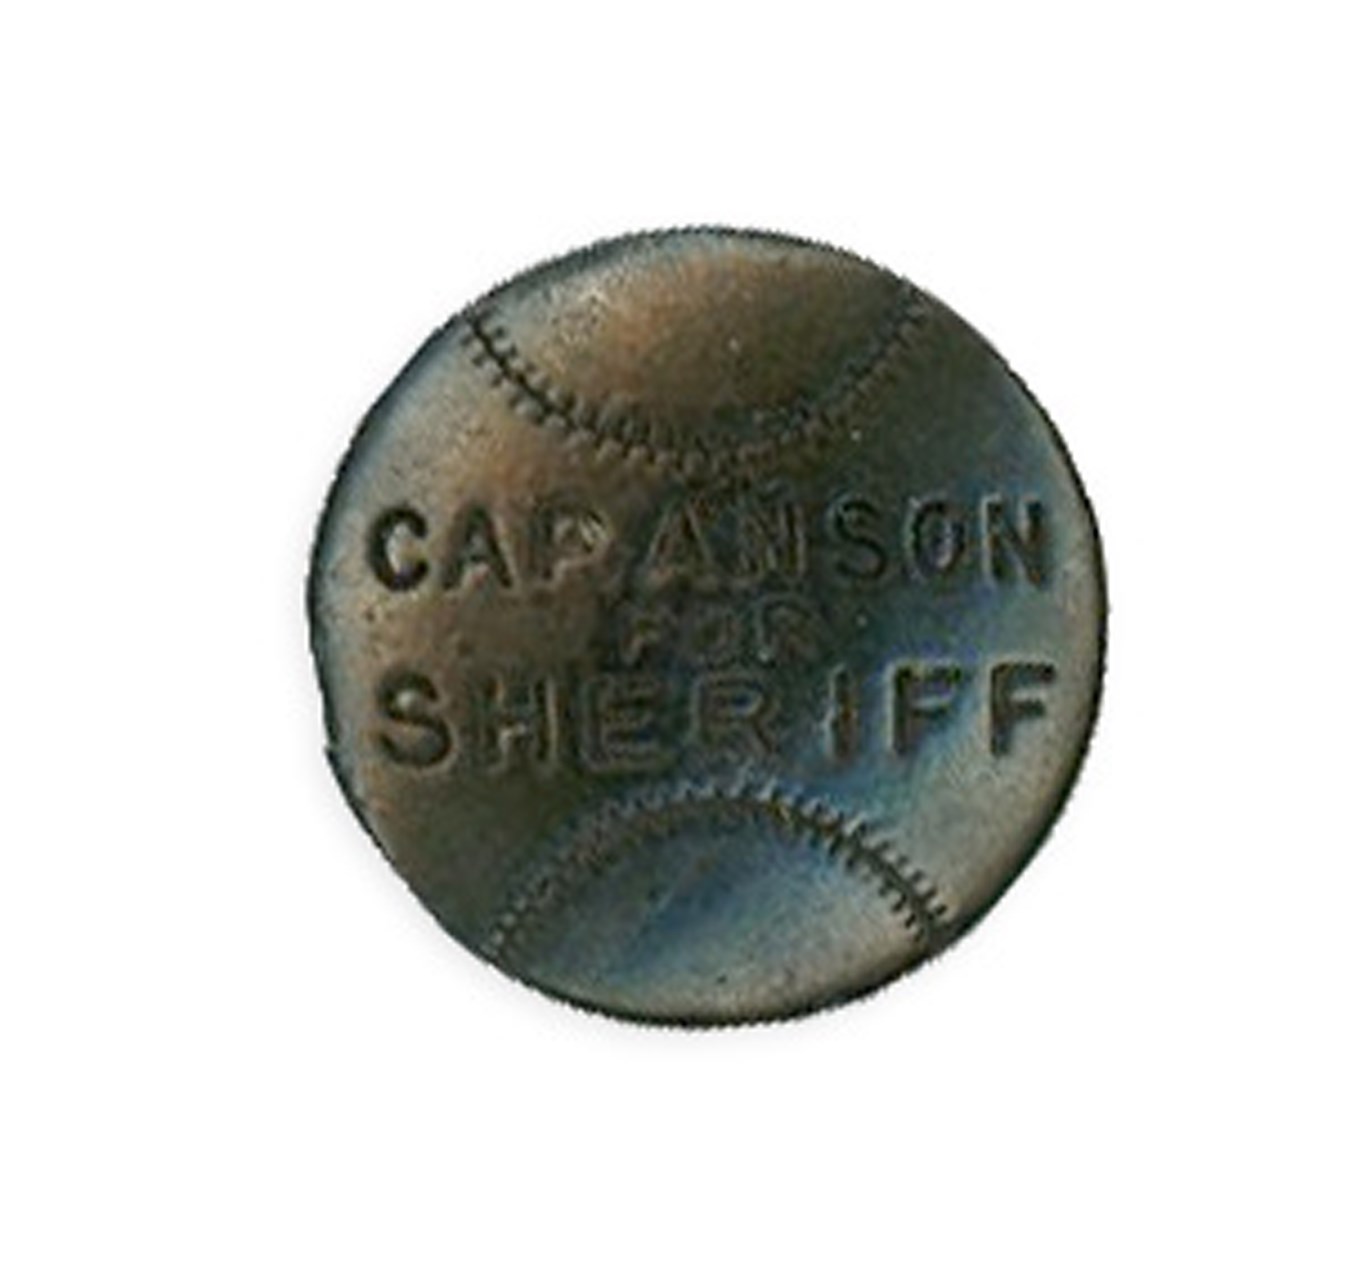 Early Baseball - 1907 "Cap Anson for Sheriff" Metal Lapel Campaign Stud